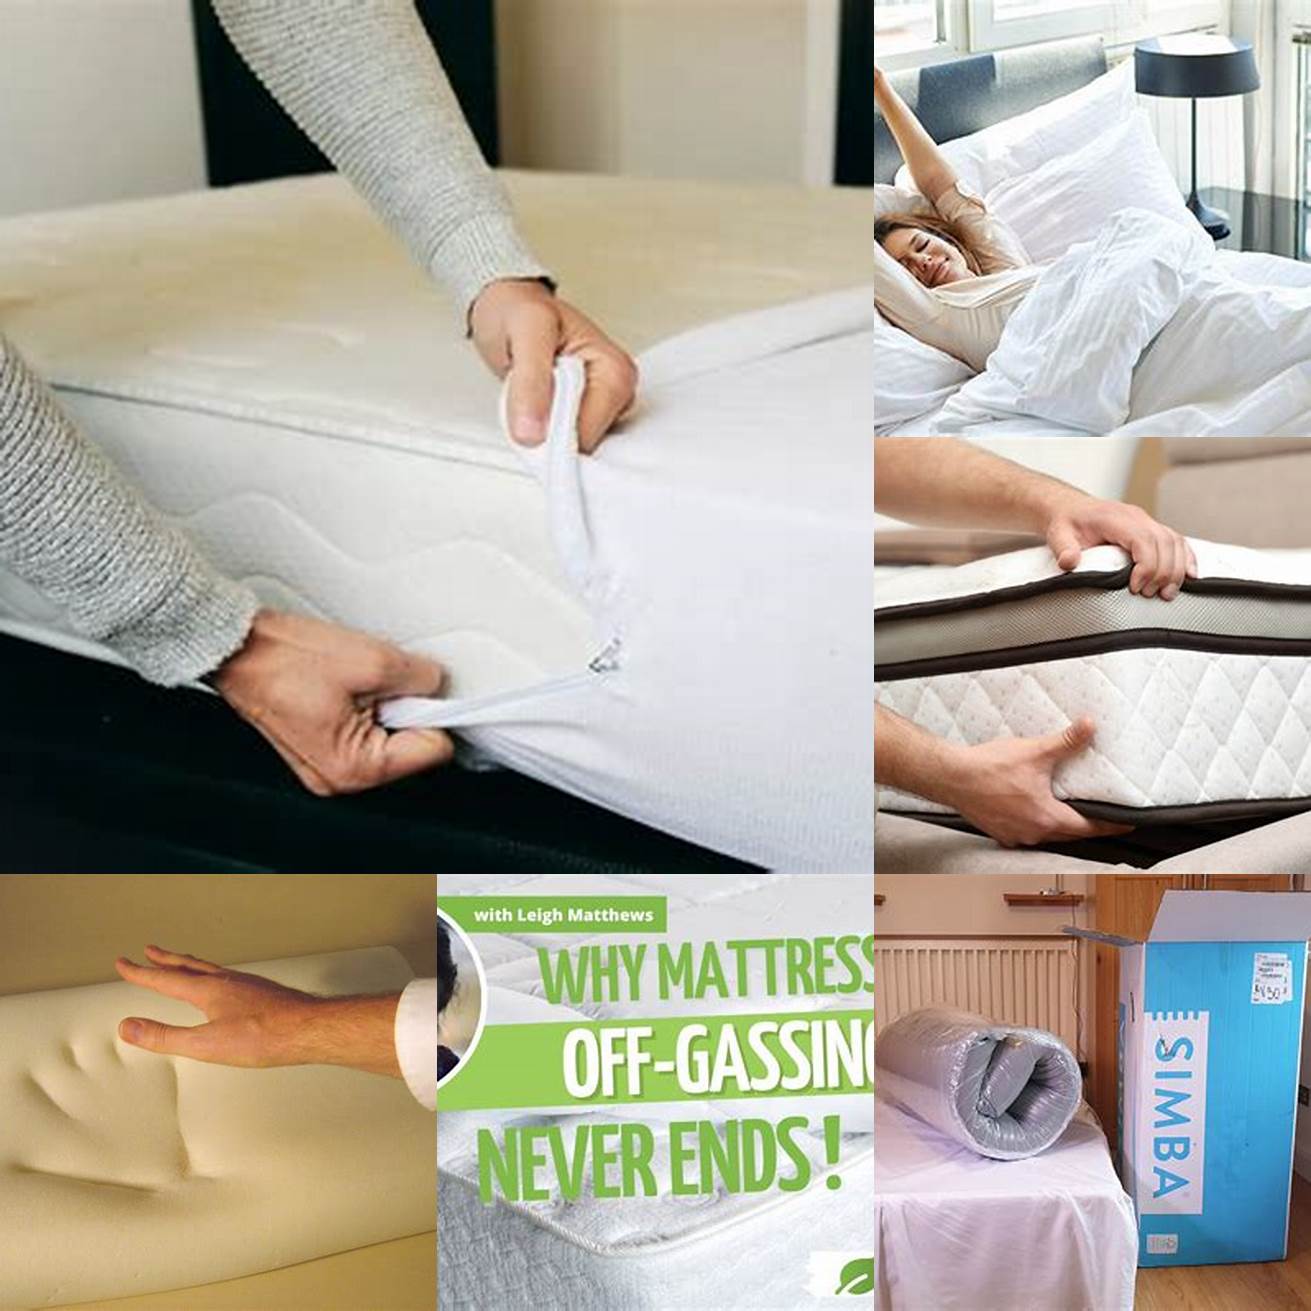 Off-gassing Some memory foam beds emit a chemical odor when first unpacked which can be unpleasant and even cause respiratory issues for some people